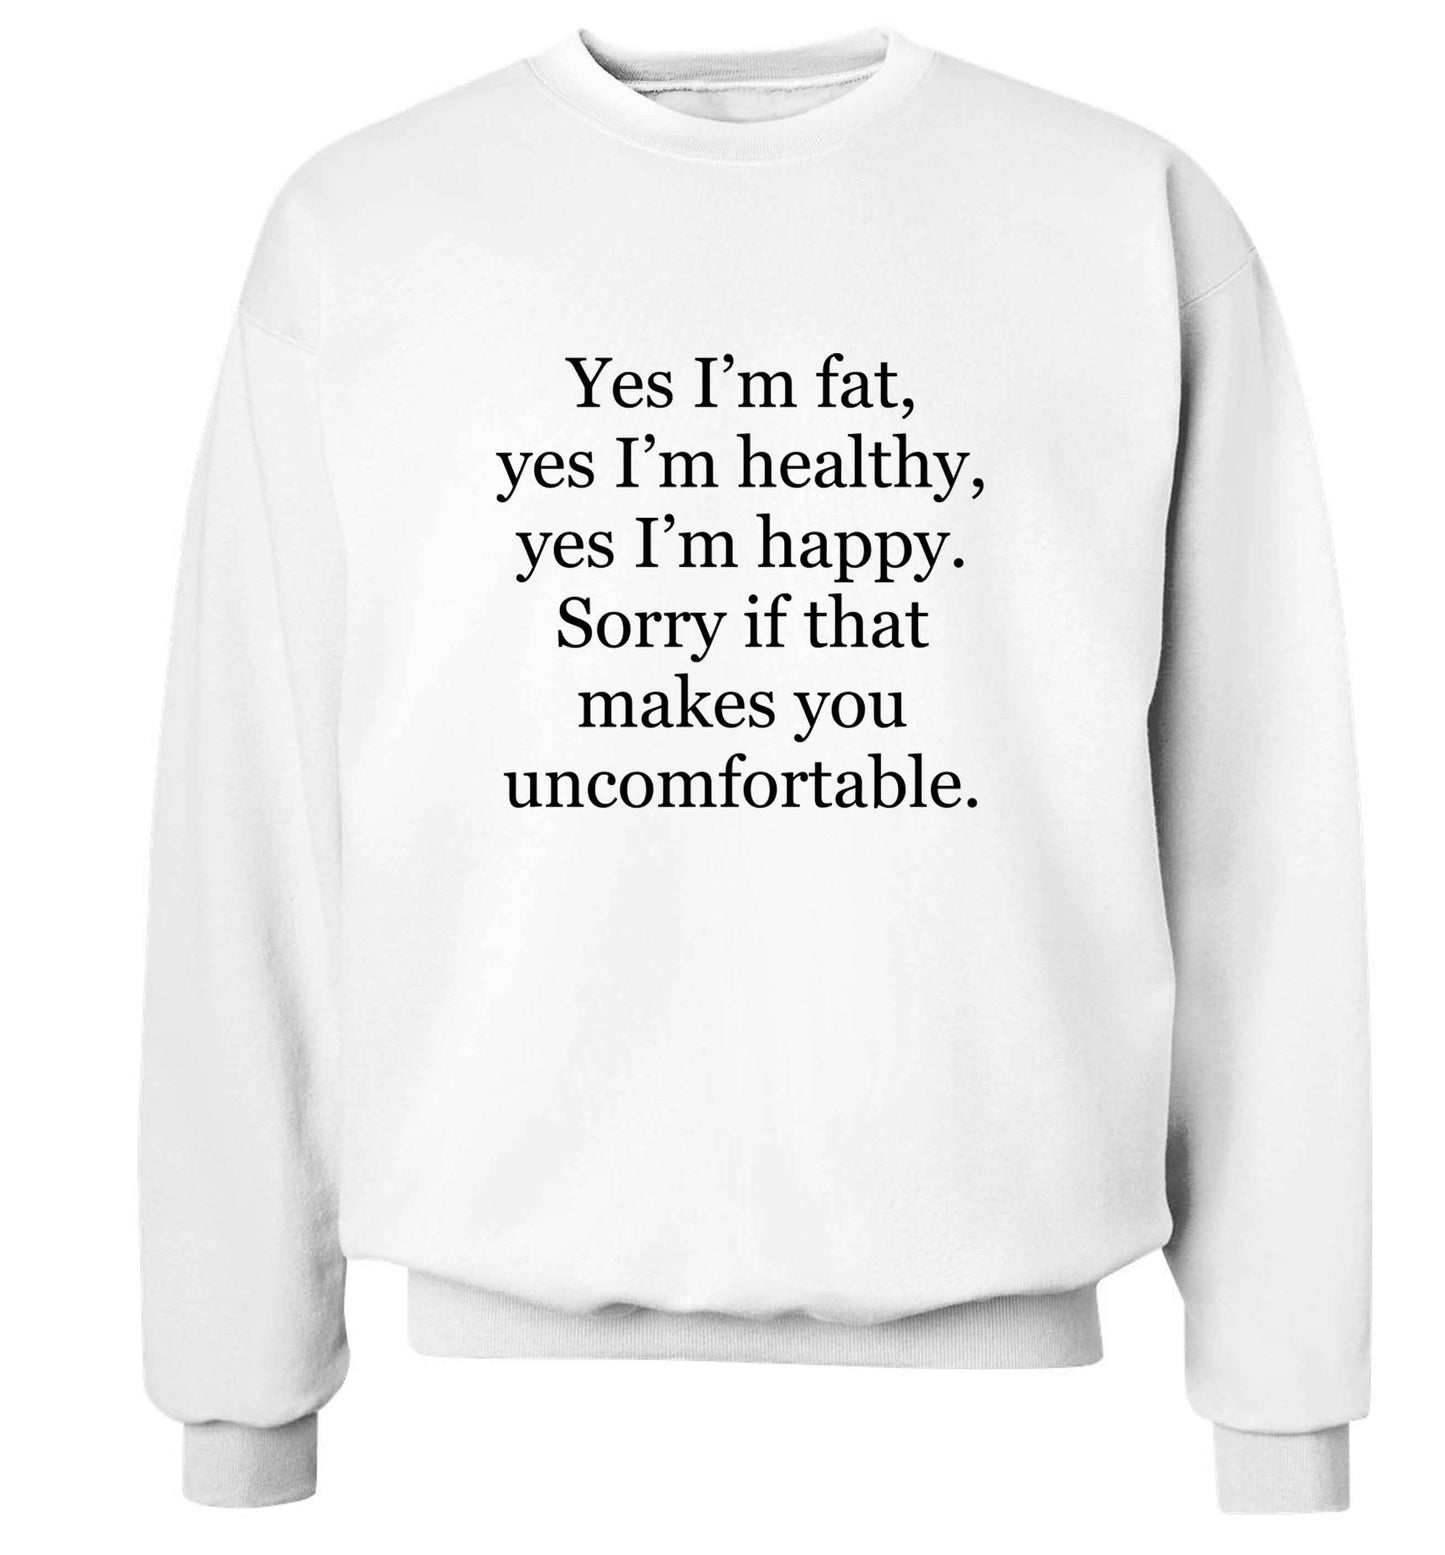 Yes I'm fat, yes I'm healthy, yes I'm happy. Sorry if that makes you uncomfortable adult's unisex white sweater 2XL